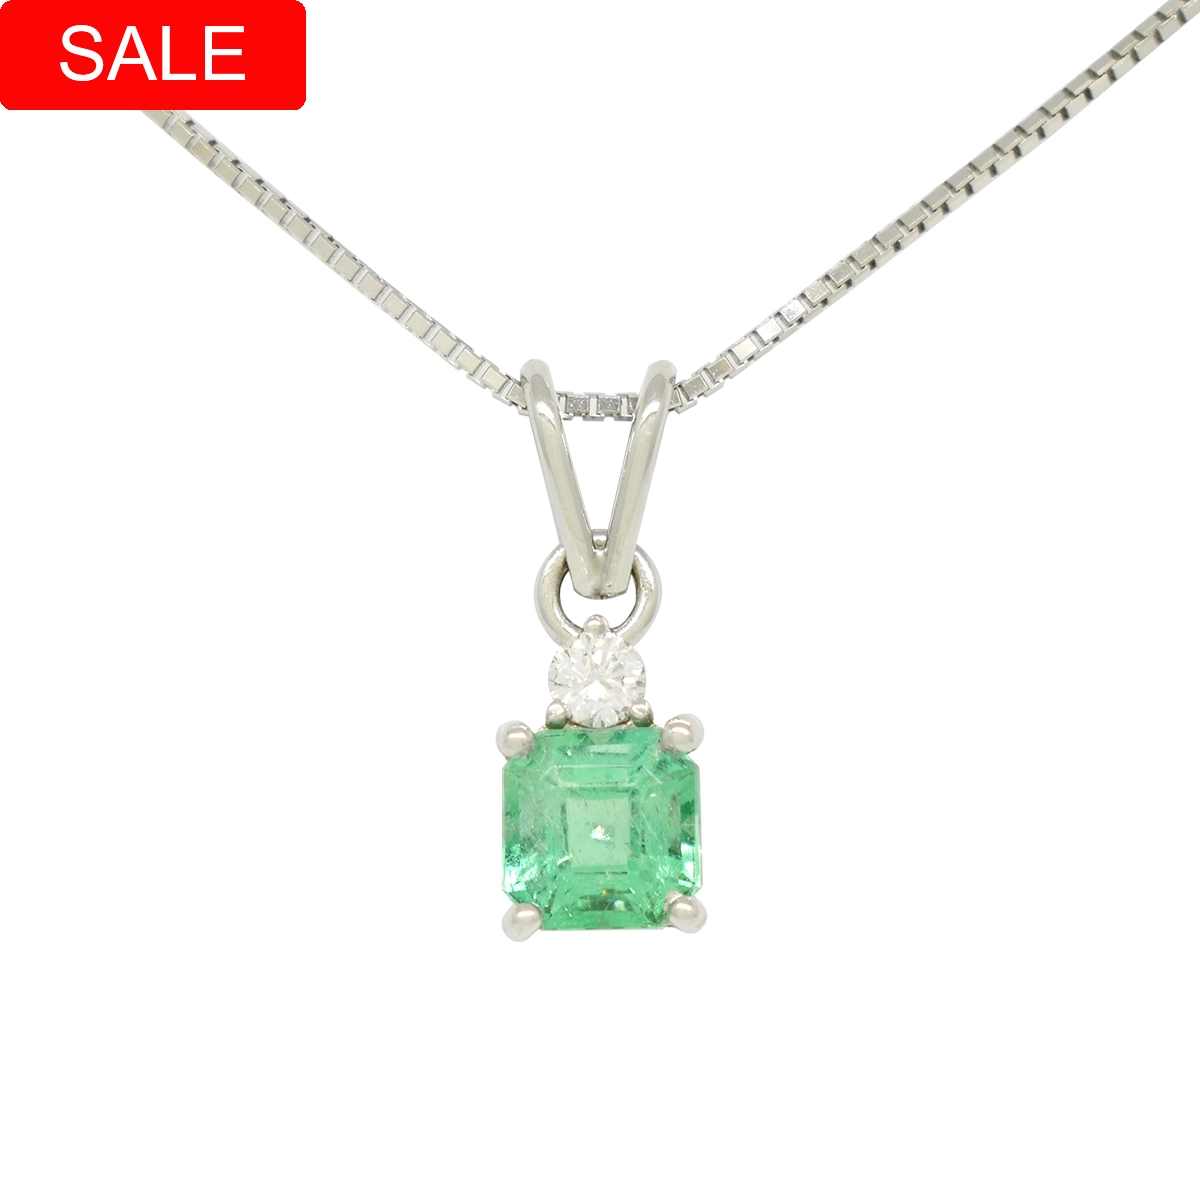 Emerald and diamond pendant with 1 Ct. square shape emerald cut natural emerald and 0.10 Ct. round cut genuine diamond in solid 18K white gold necklace